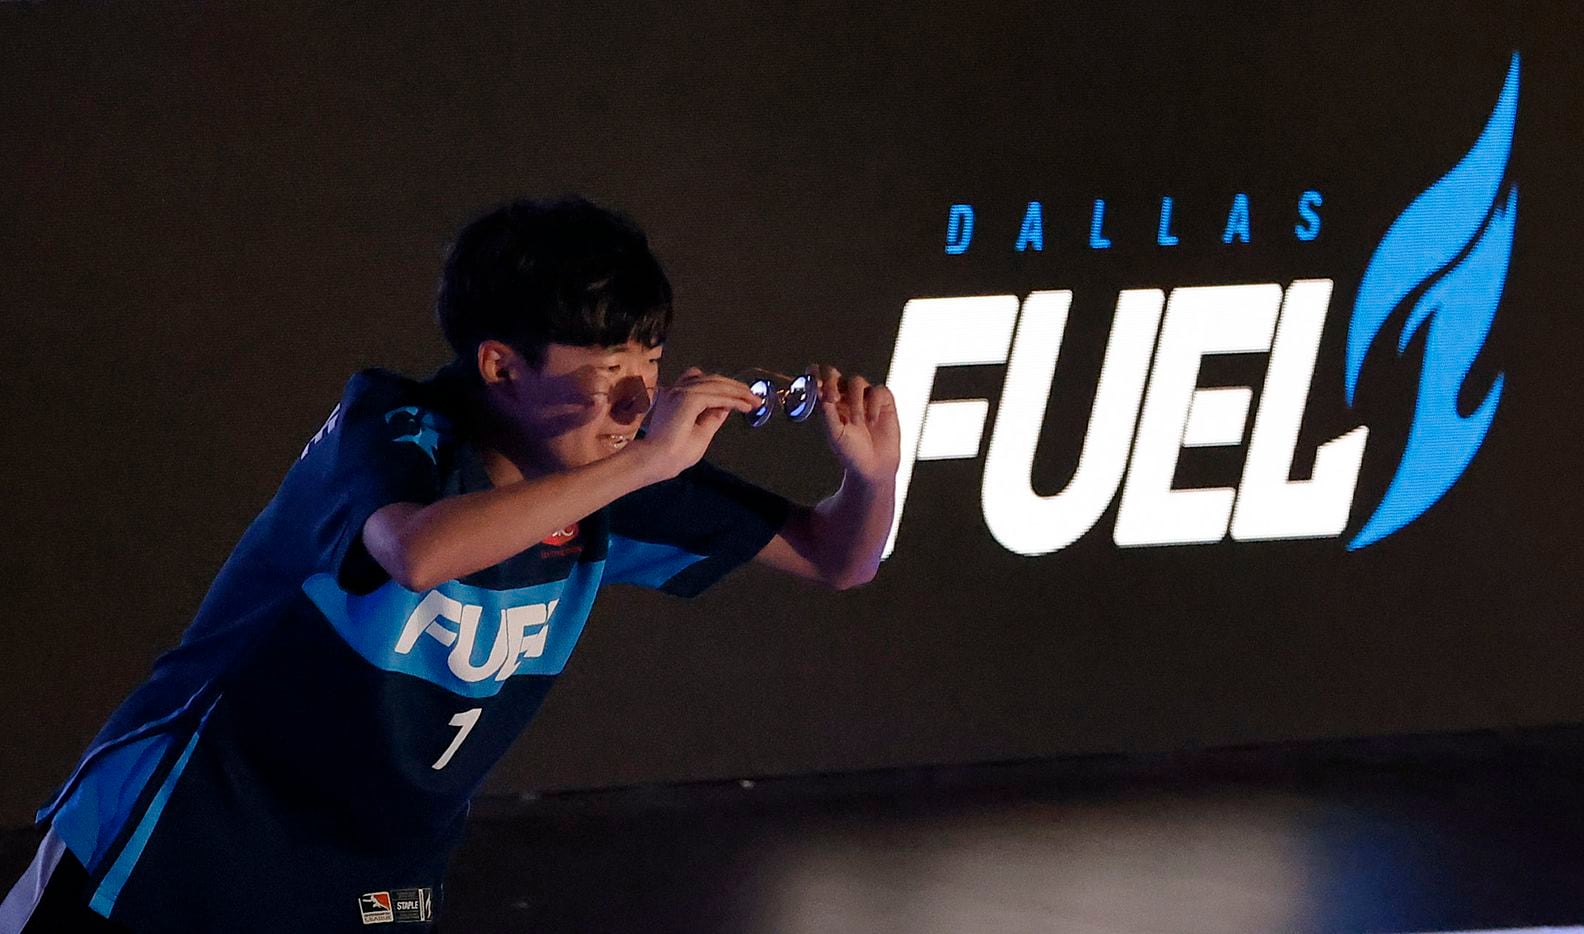 Dallas Fuel player Kim 'Sp9rk1e' Yeonghan acknowledges his fans as he's introduced before their Overwatch League game against the Houston Outlaws at Esports Stadium Arlington Friday, July 9, 2021. Dallas Fuel defeated Houston in The Battle for Texas, 3-0. It was the first in-person live competition for fans in over a year. Houston competed from their hometown. (Tom Fox/The Dallas Morning News)